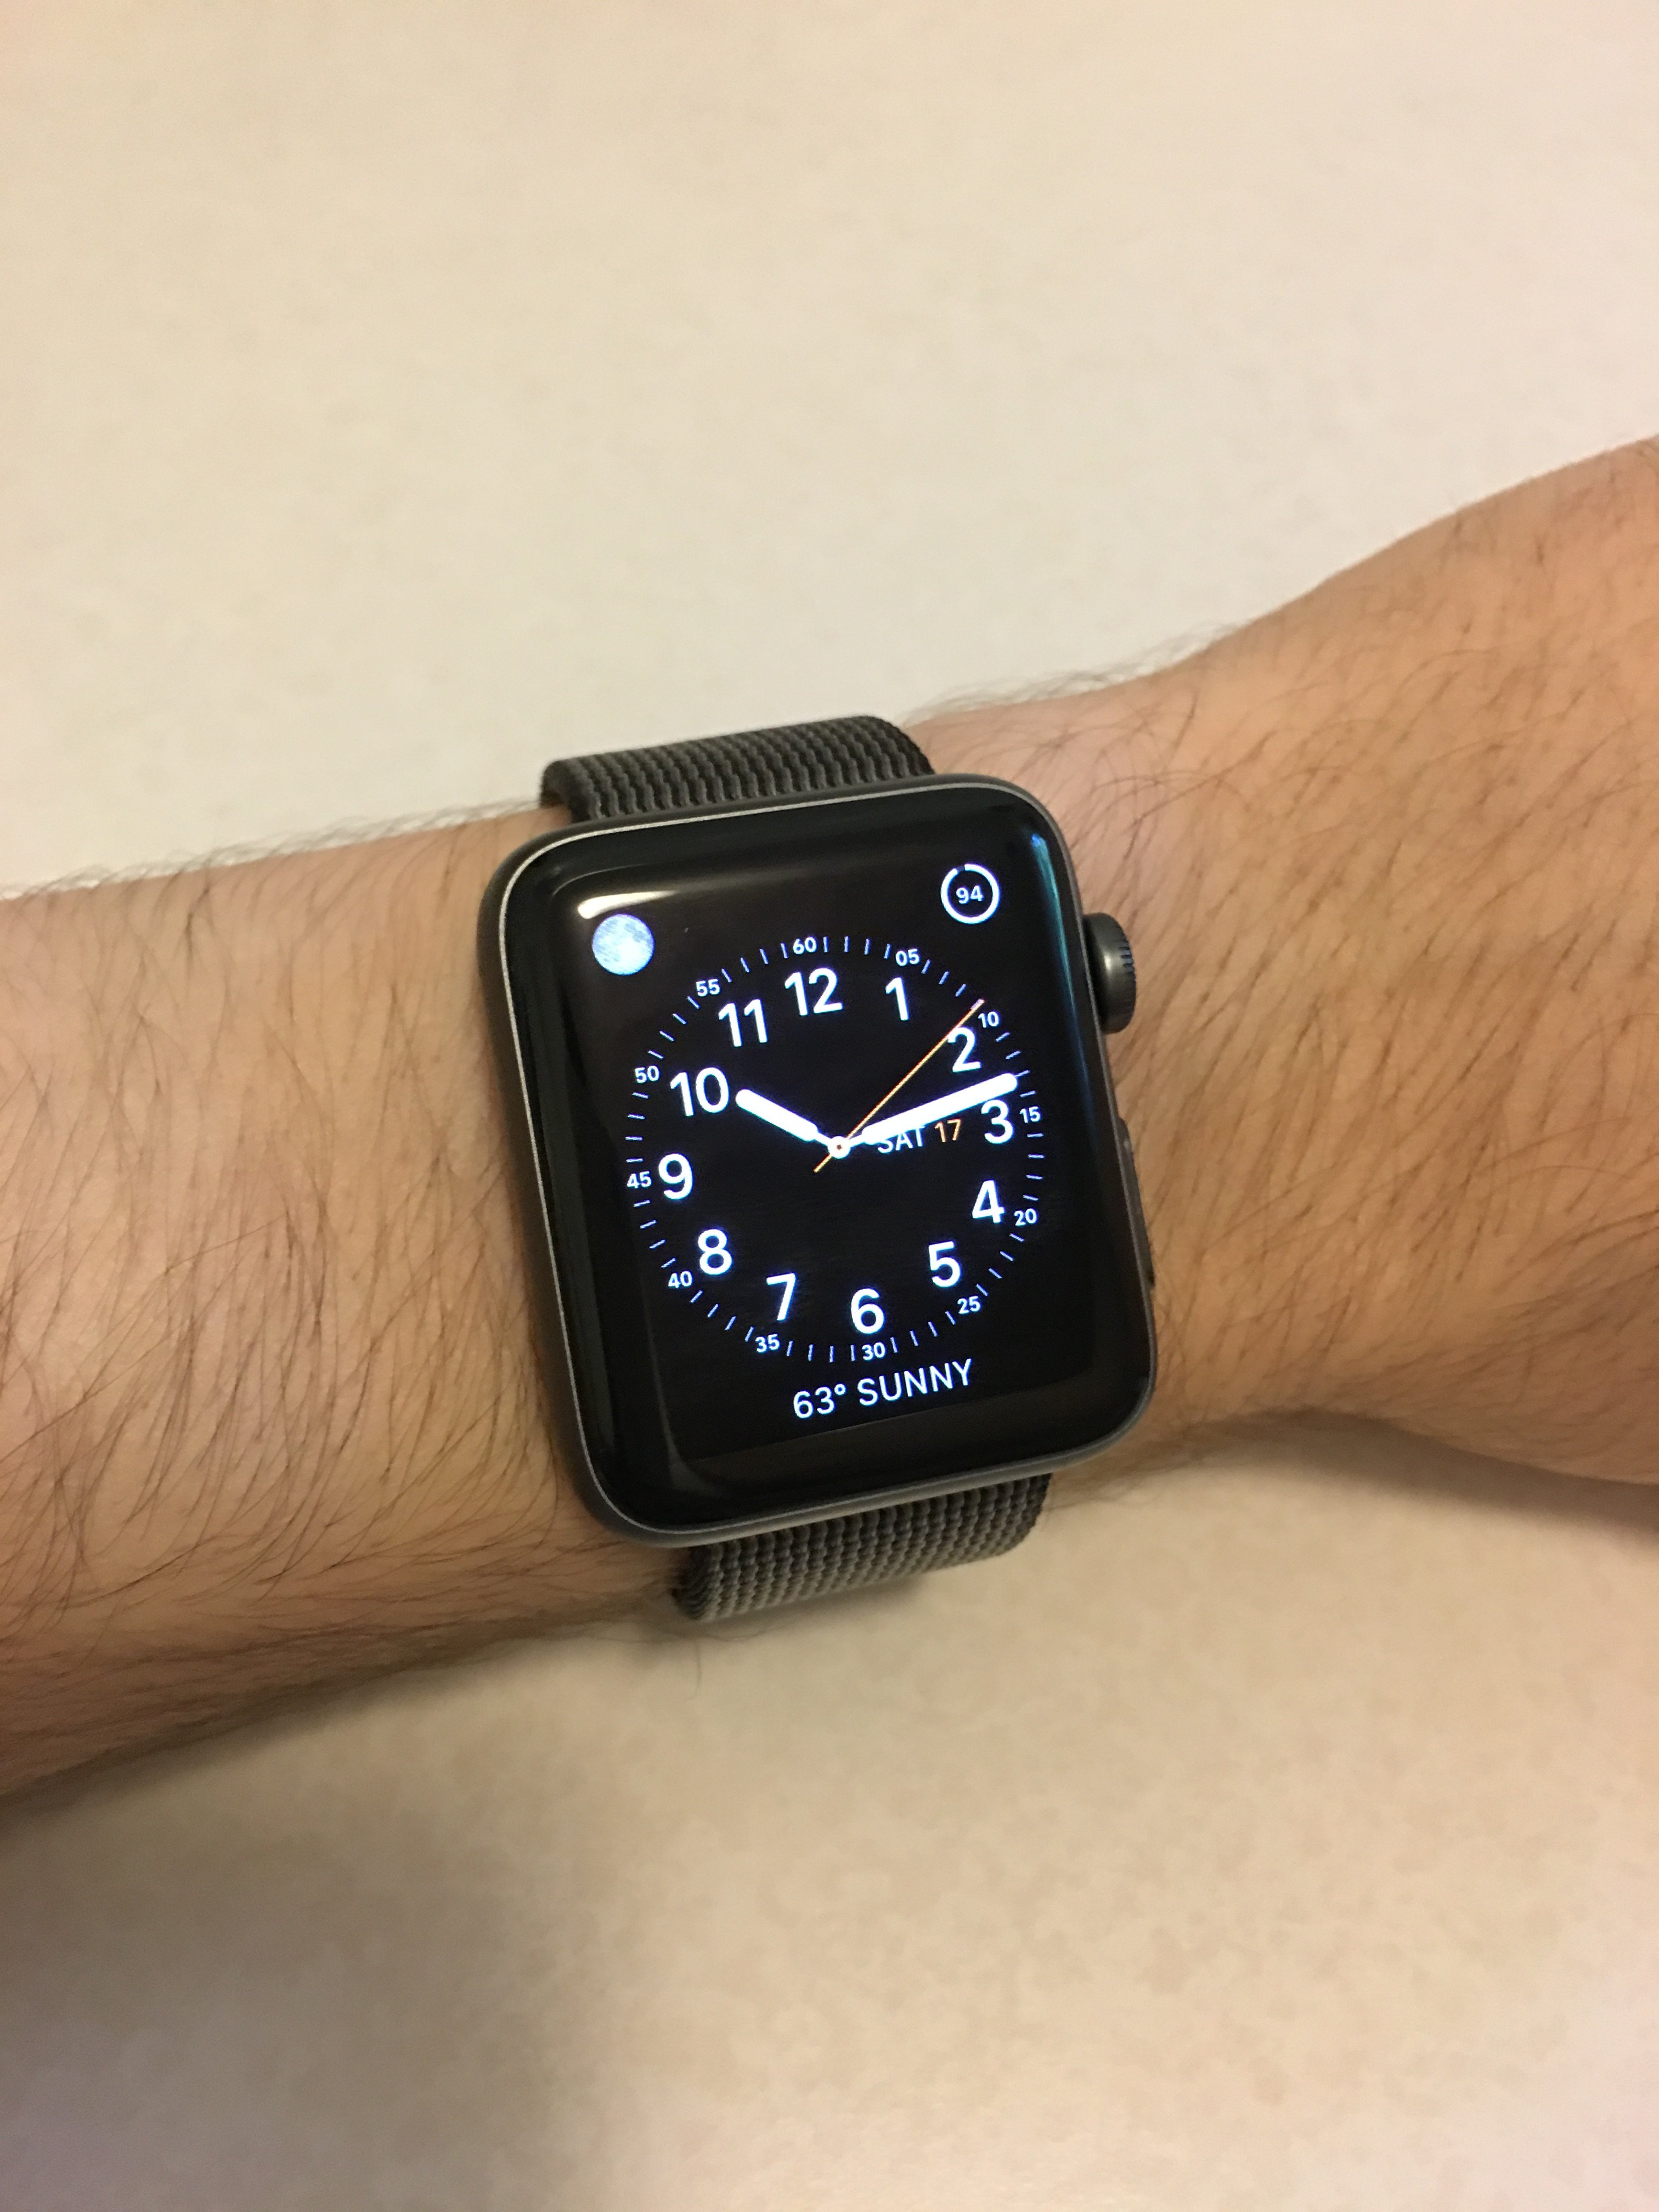 Show off your Apple Watch | Page 276 | MacRumors Forums